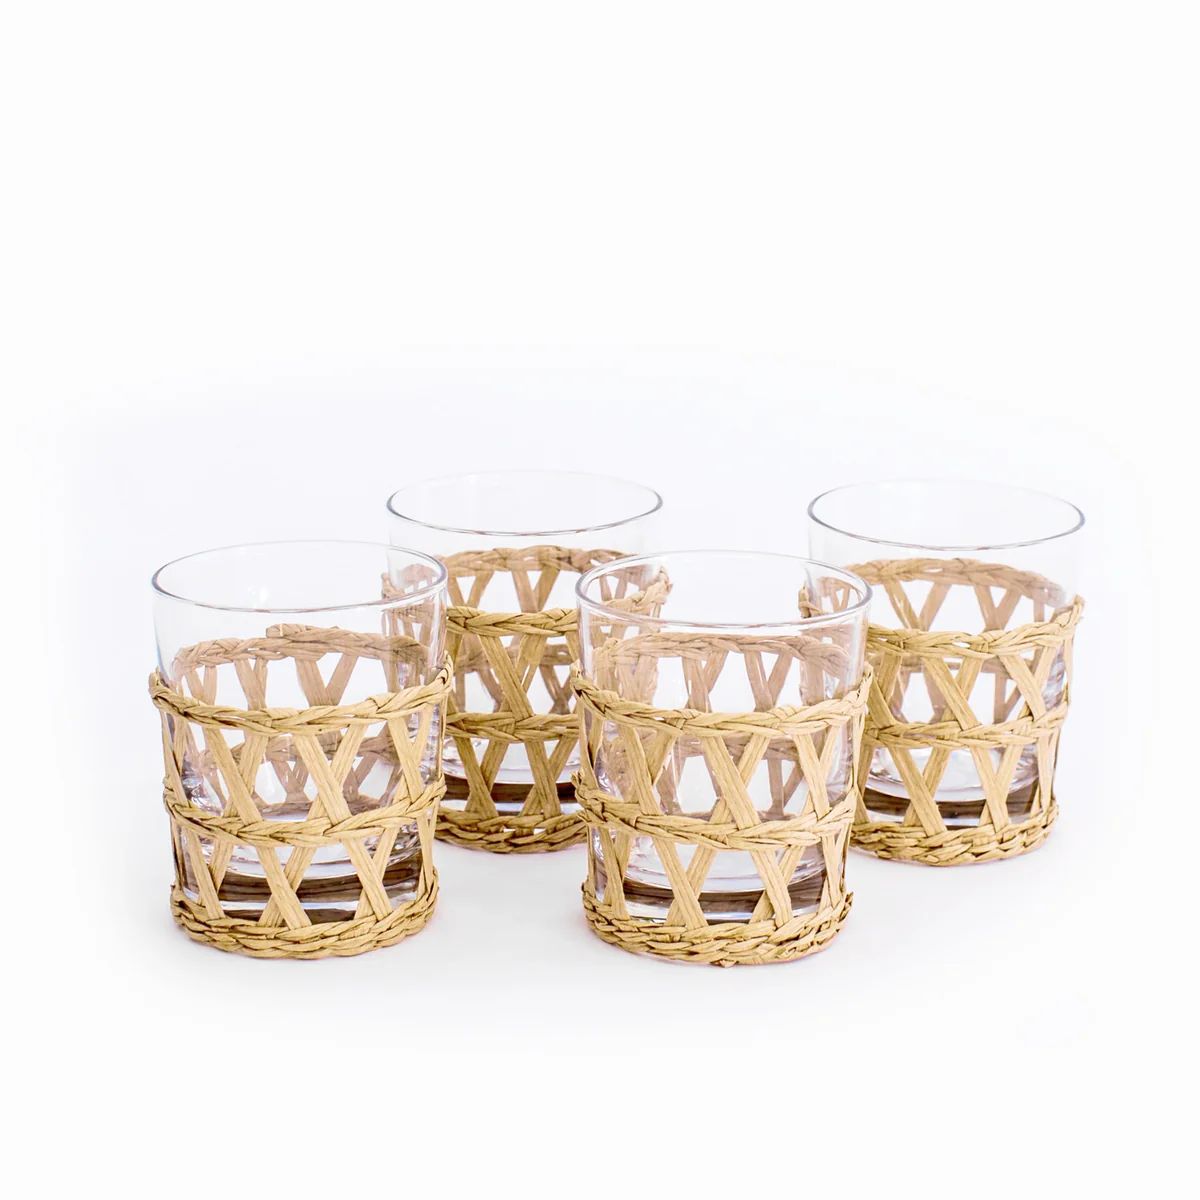 Woven Old Fashioned Glasses | Honey + Hank